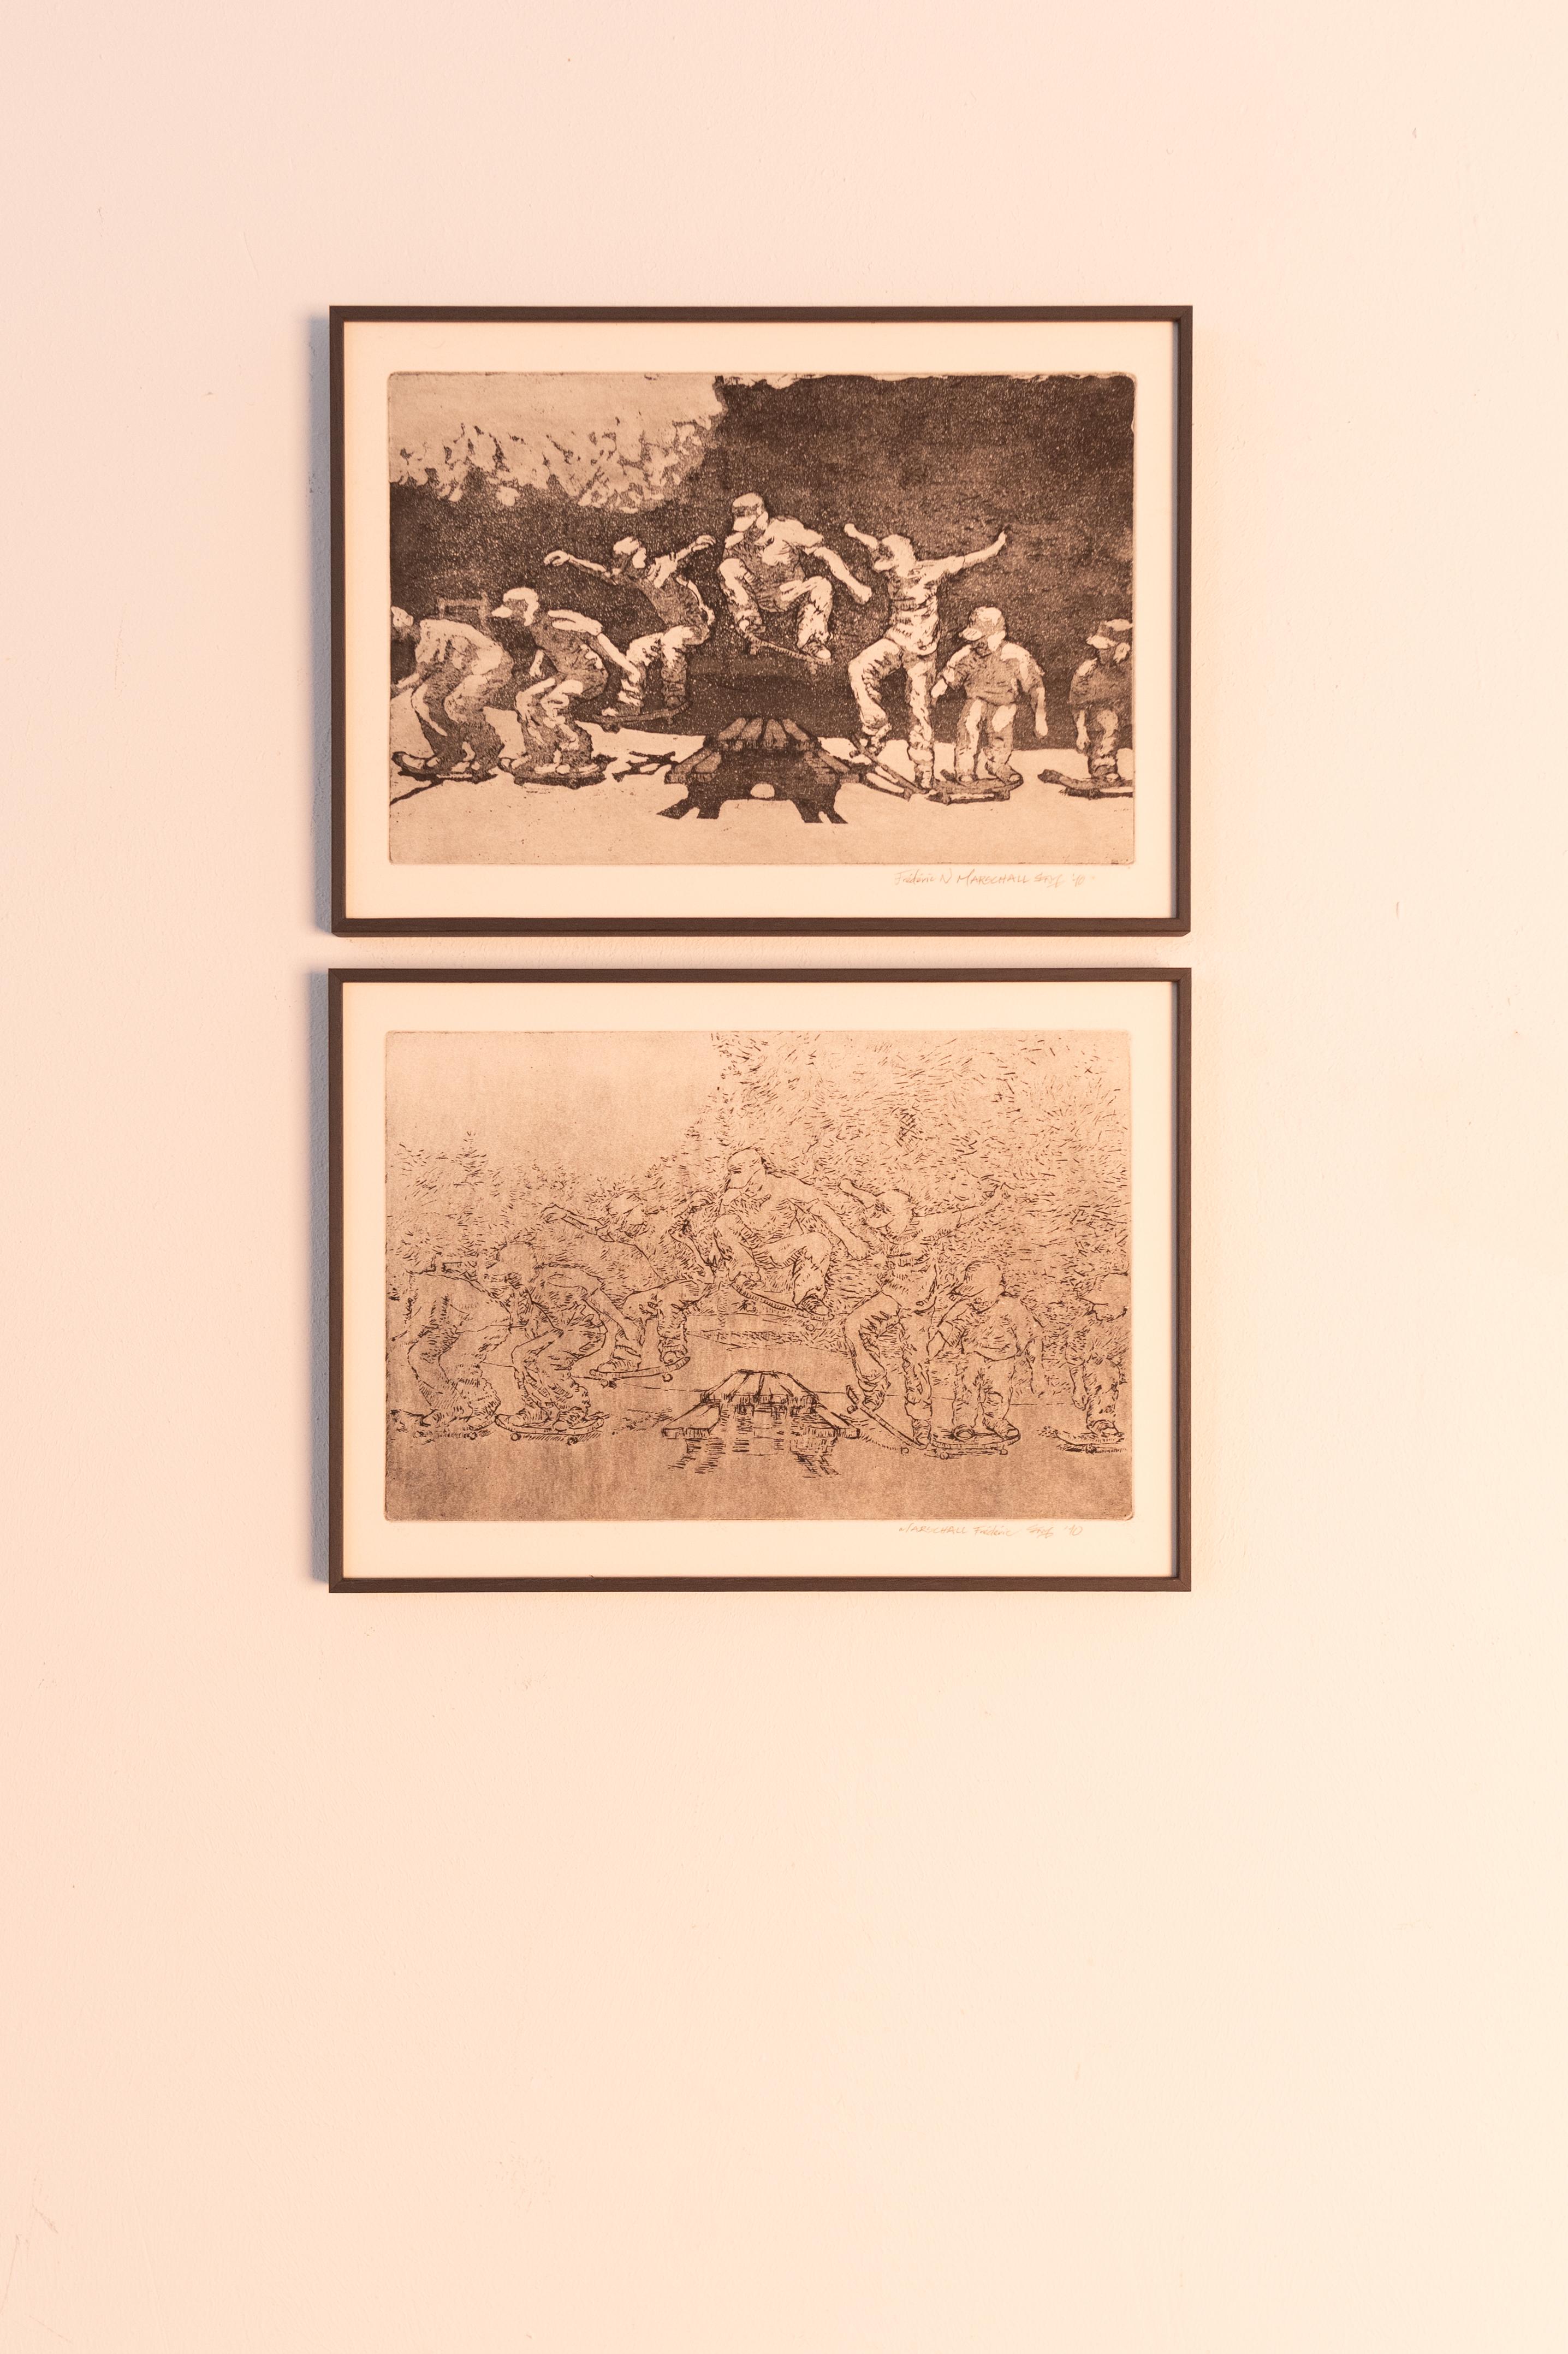 Frederic Marschall Figurative Print - 1 etching and 1 aquatint of skating youngsters (2010)